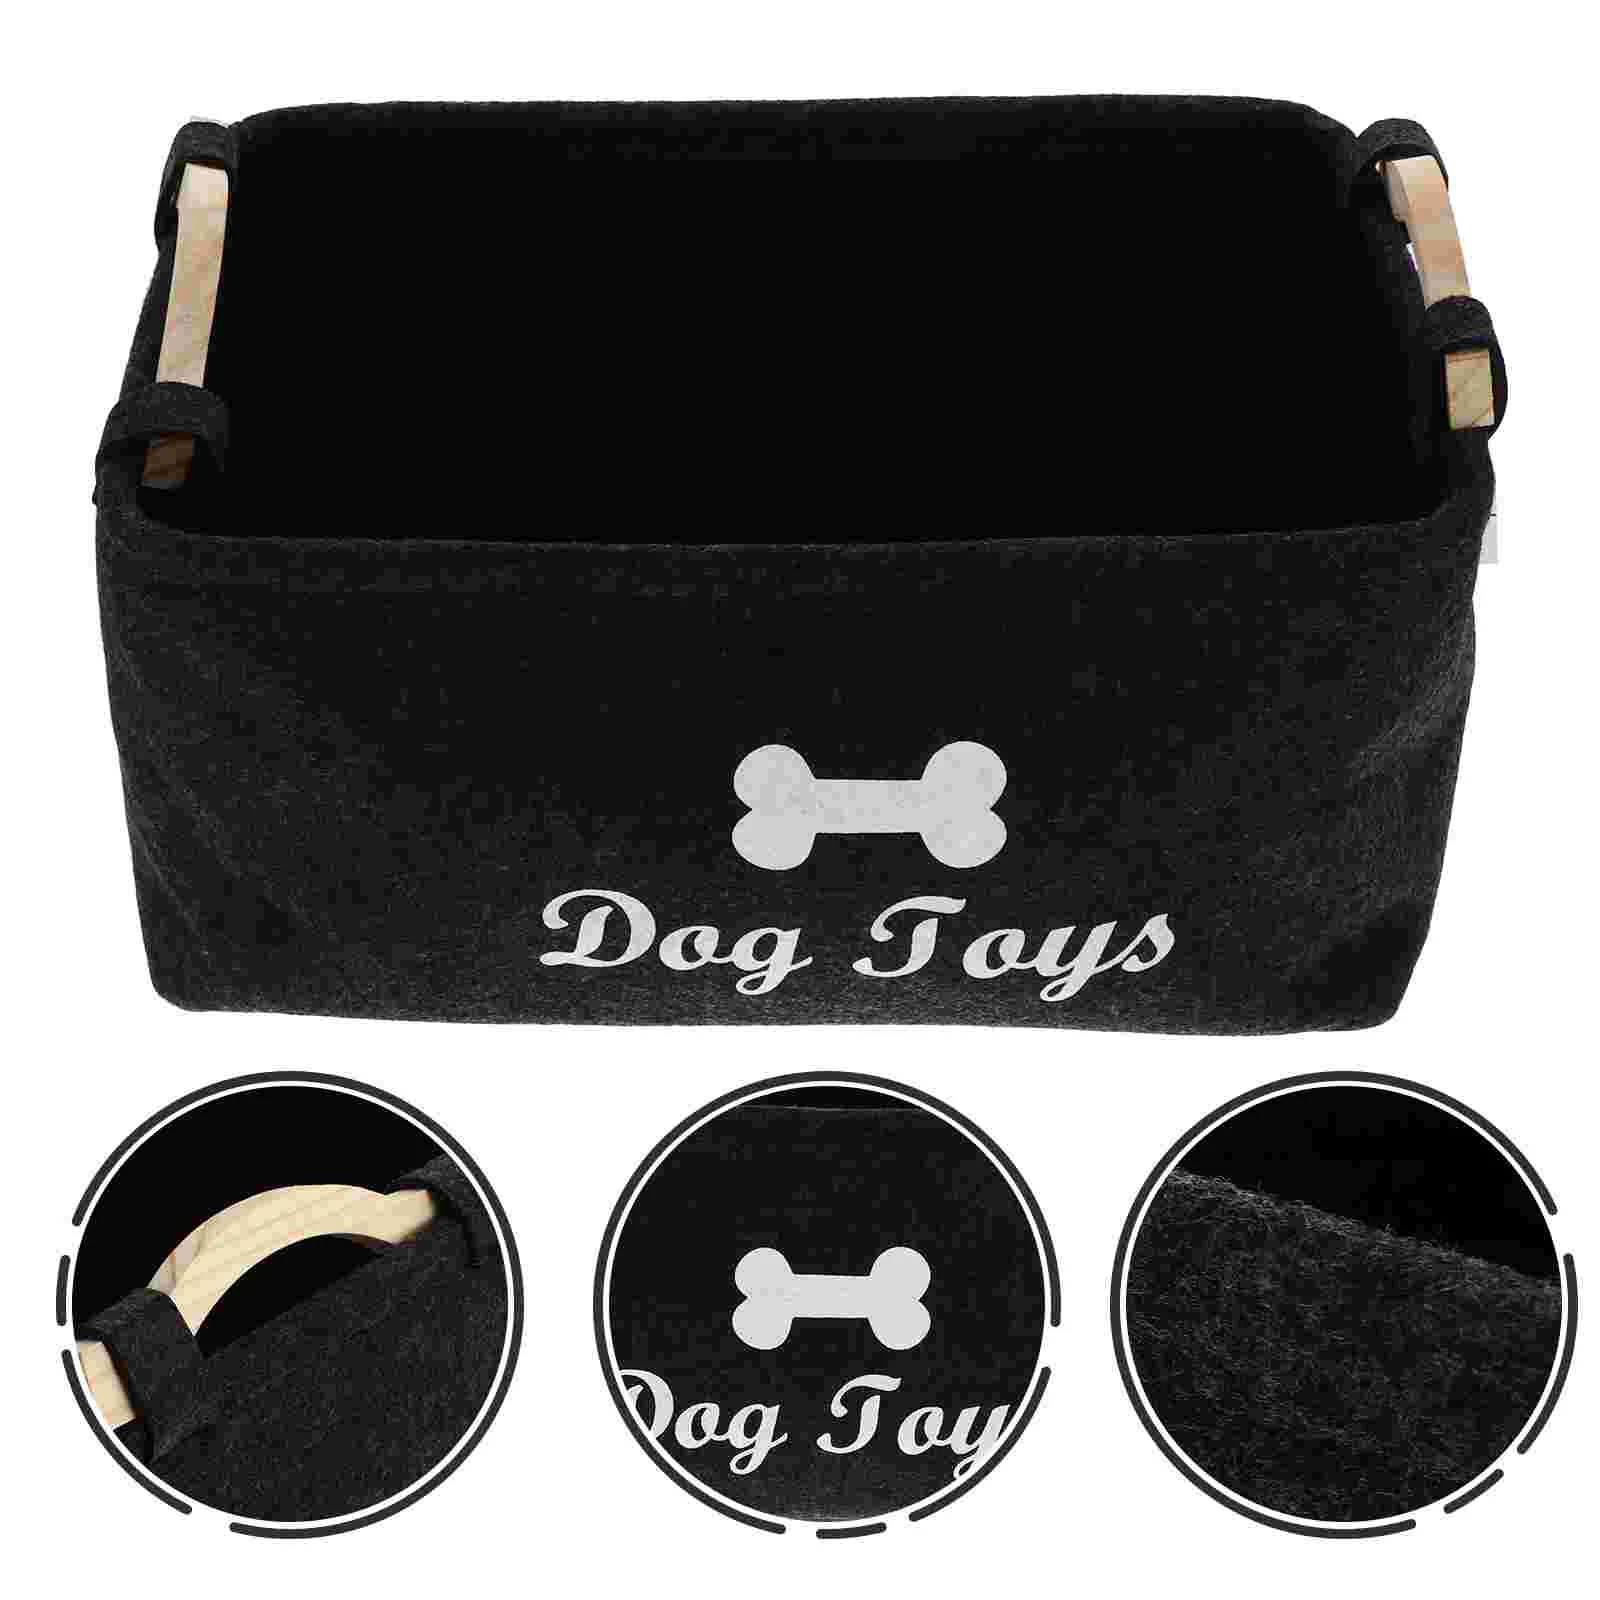 1pc Pet Toy Box And Dog Toy Box Storage Organizer, Perfect For